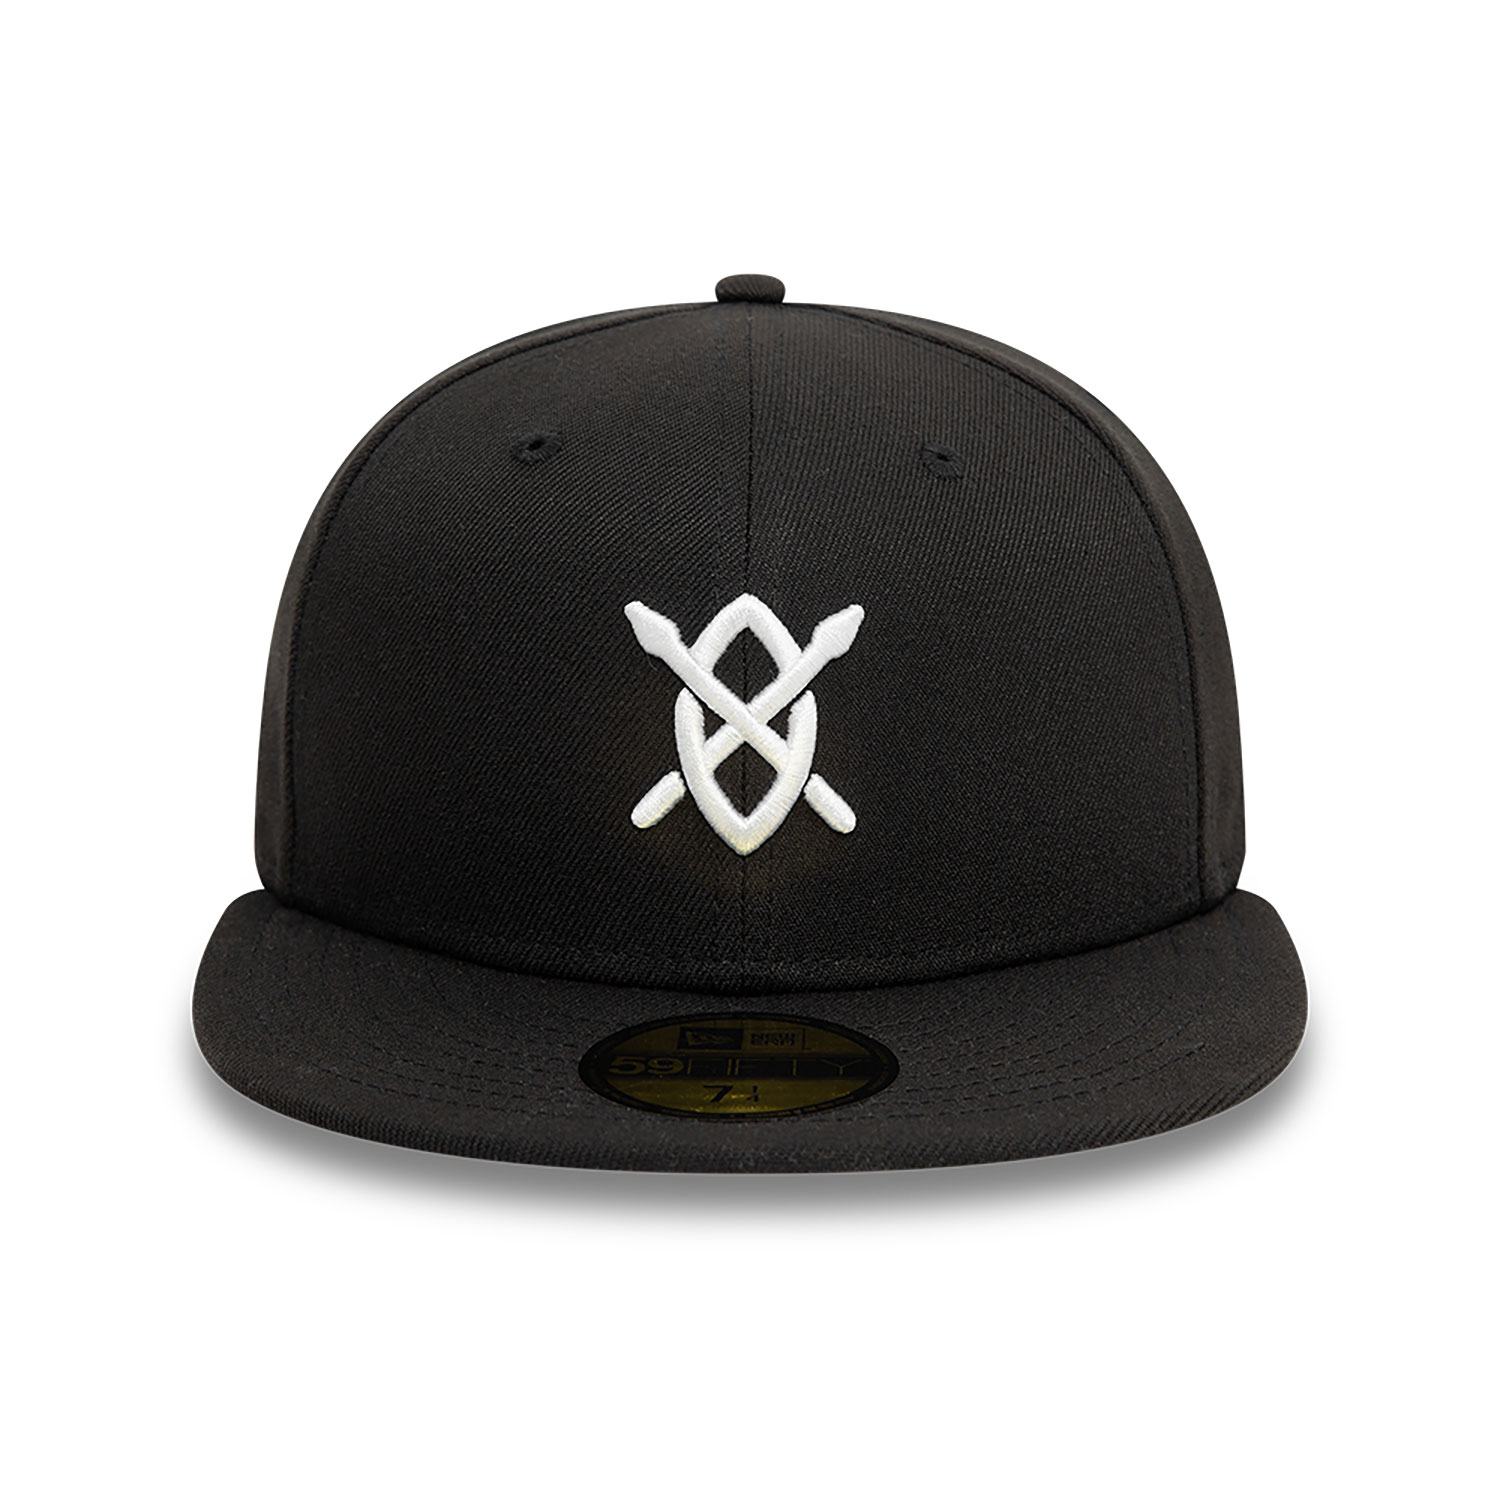 New Era x Daily Paper Black 59FIFTY Fitted Cap